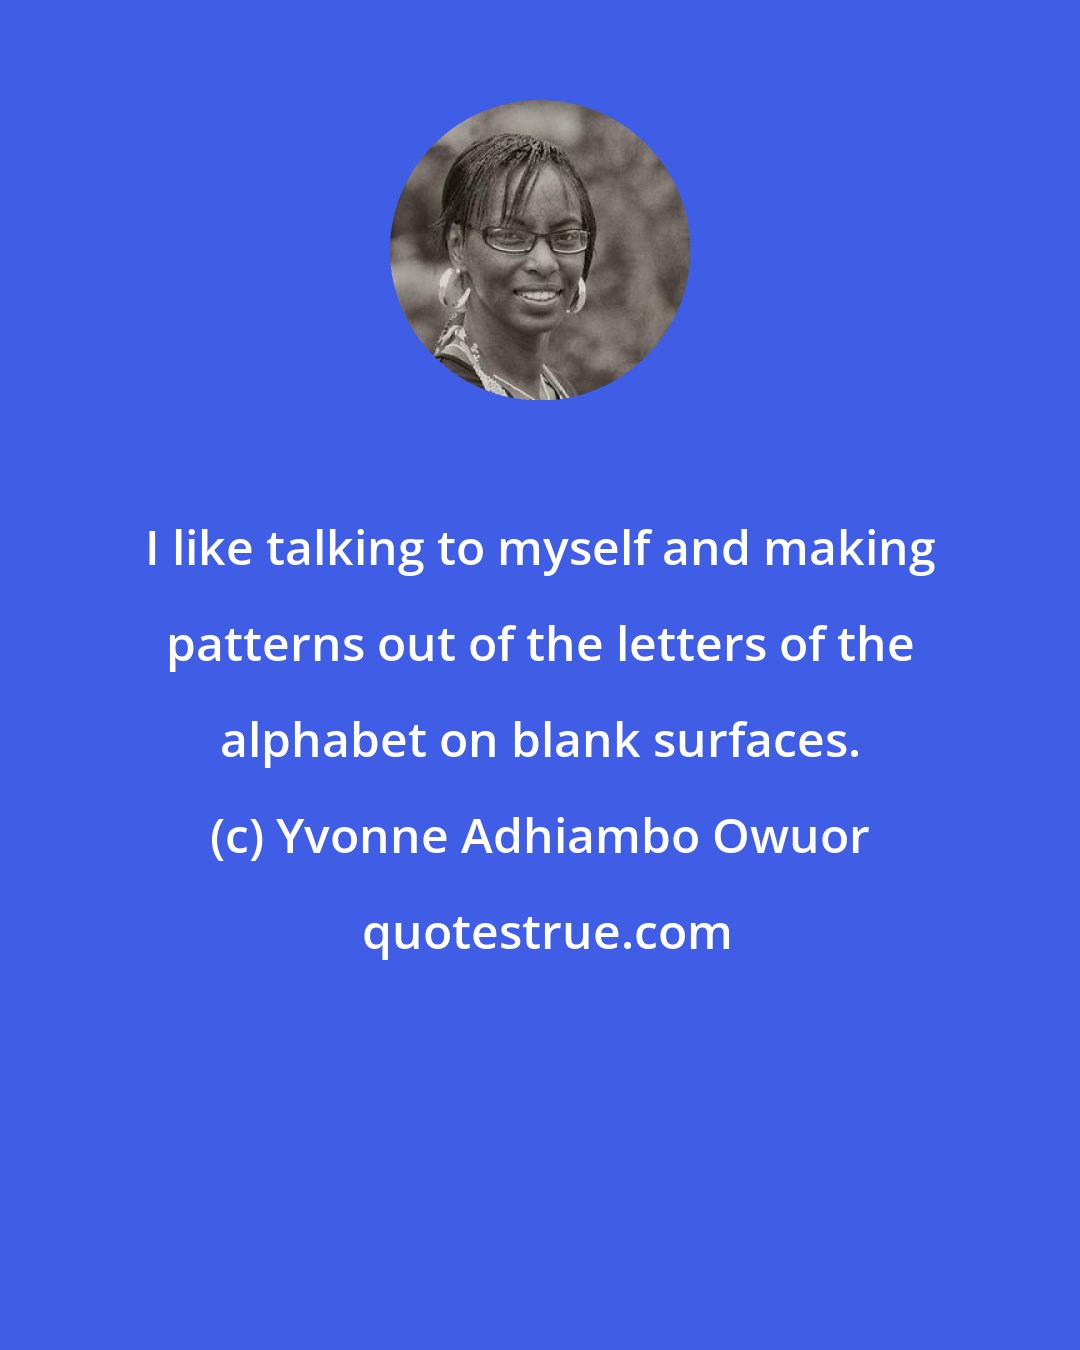 Yvonne Adhiambo Owuor: I like talking to myself and making patterns out of the letters of the alphabet on blank surfaces.